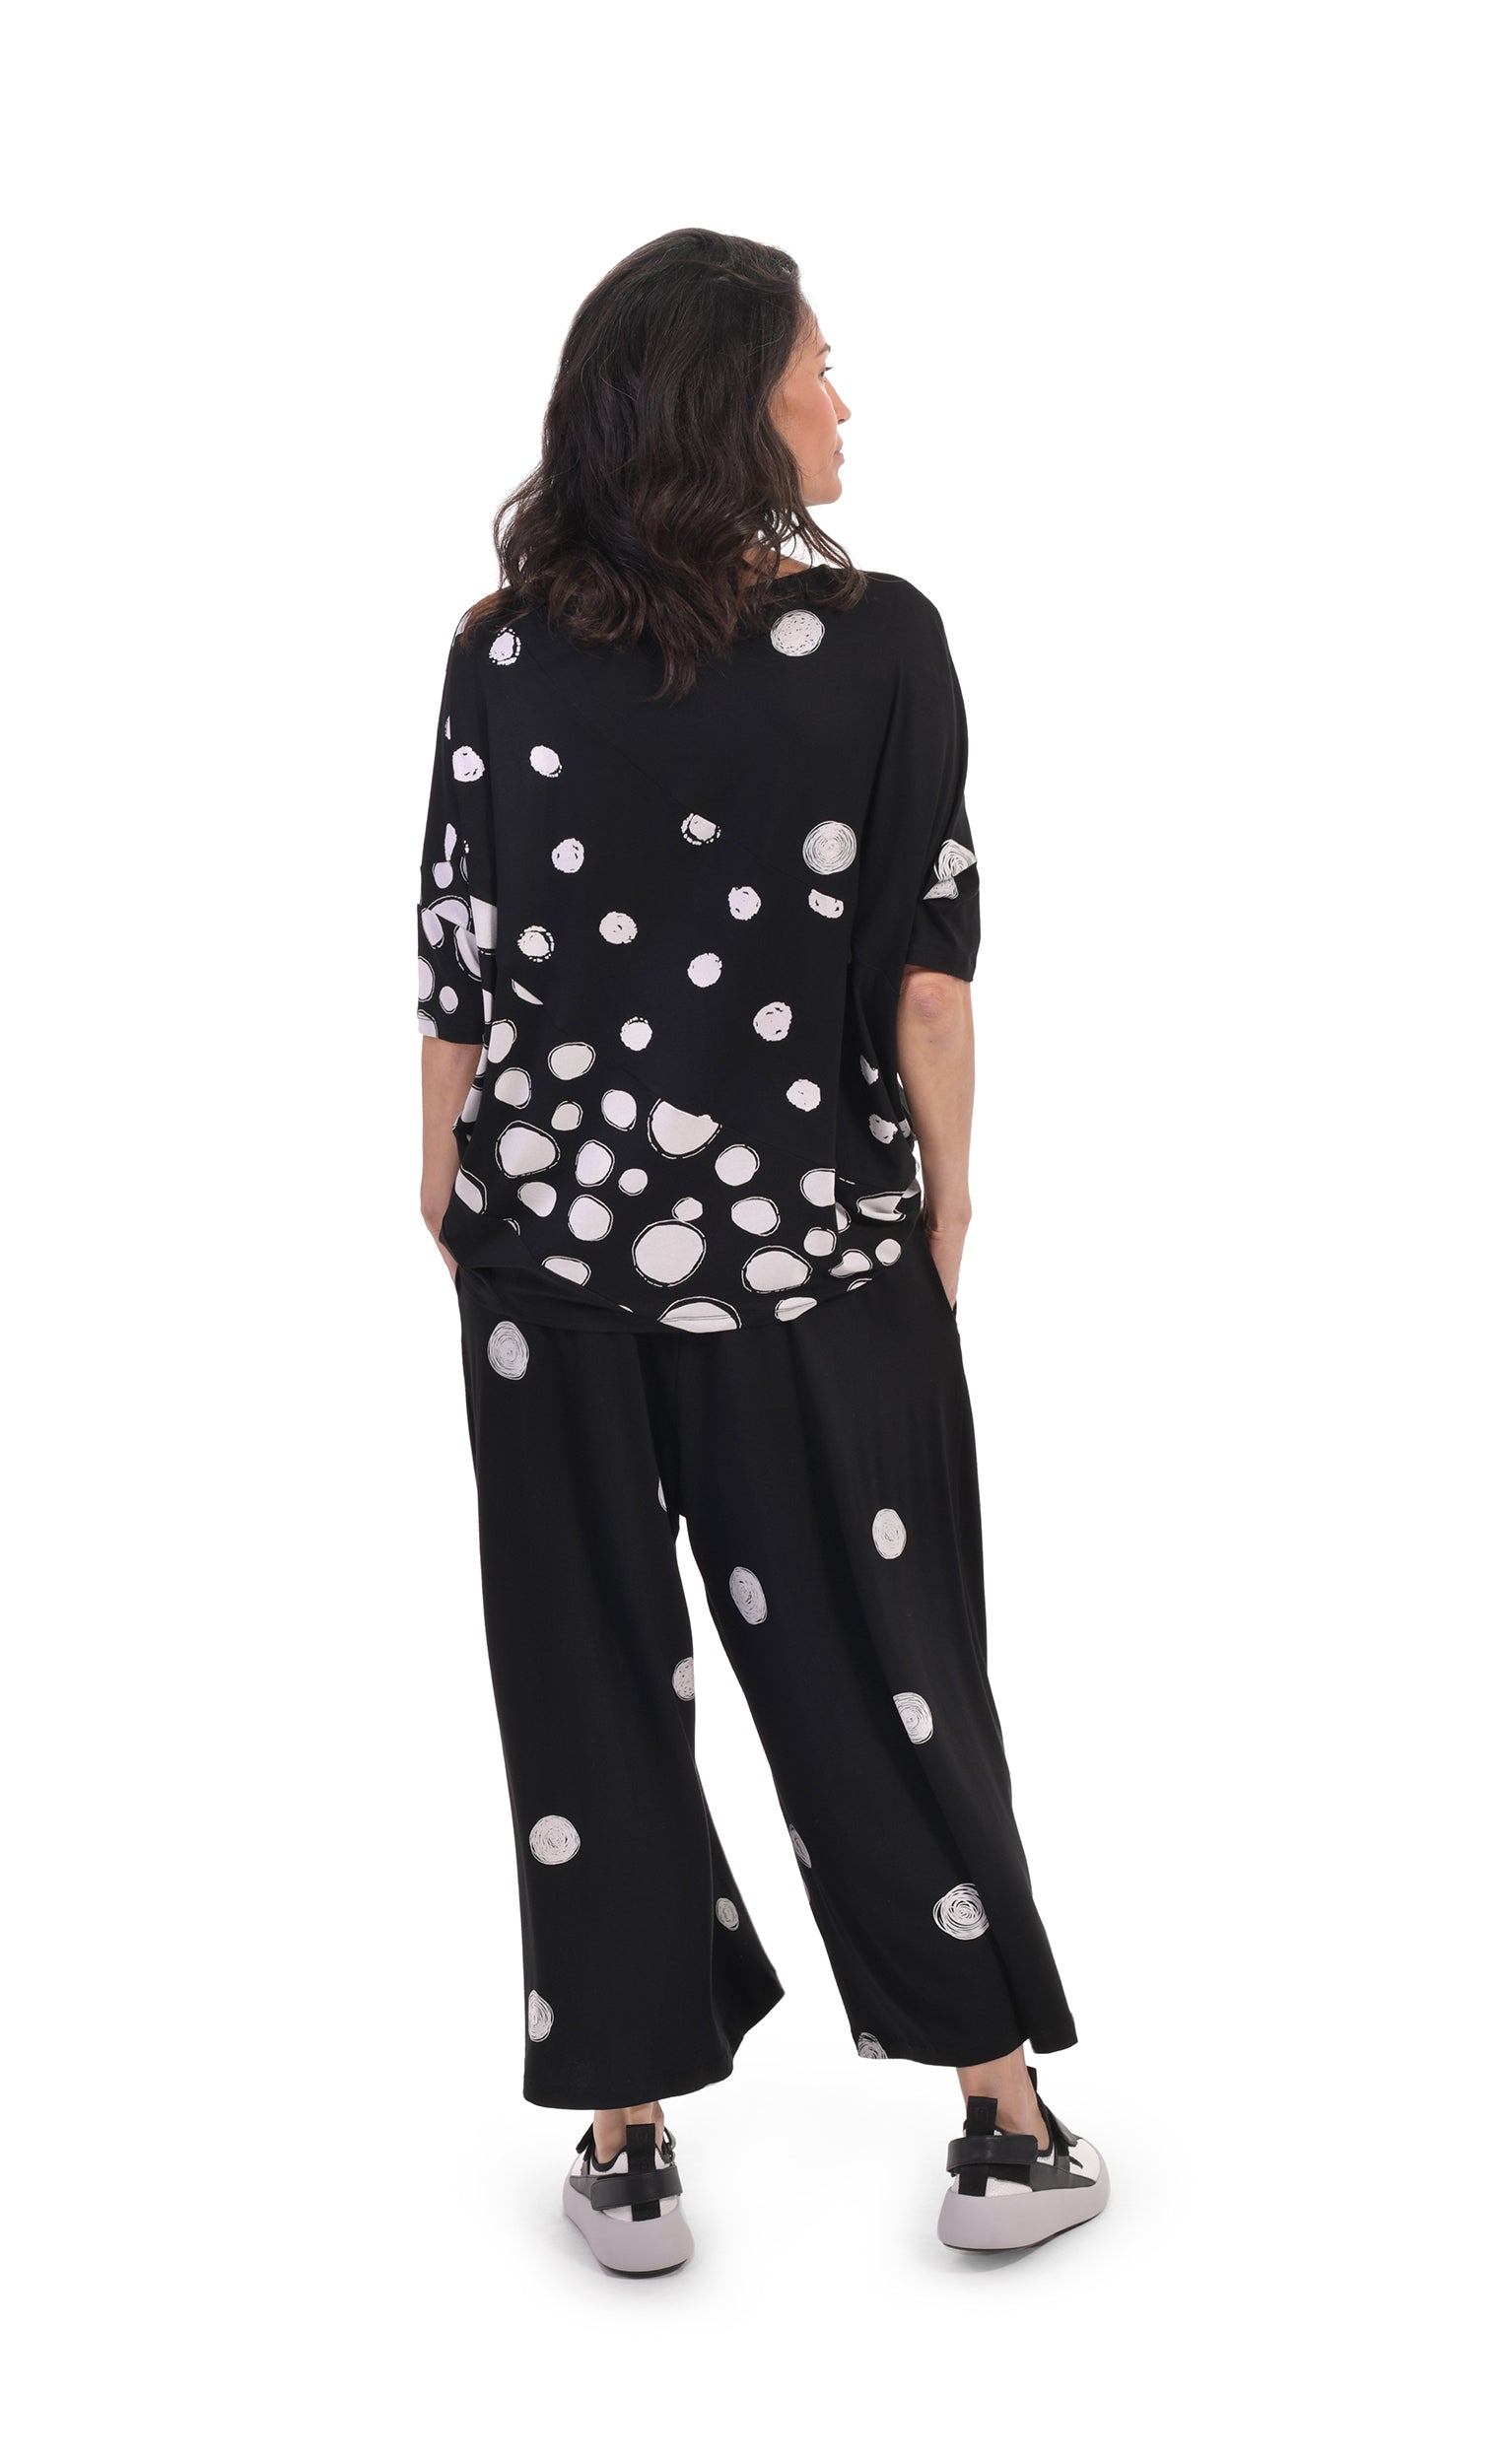 Back, full body view of a woman wearing the alembika multi spotted lia jersey top. This top is black with different types of white spots all over it. The sleeves are 3/4 length and the shirt has an oversized fit. On the bottom she is wearing full leg black pants with white dots.